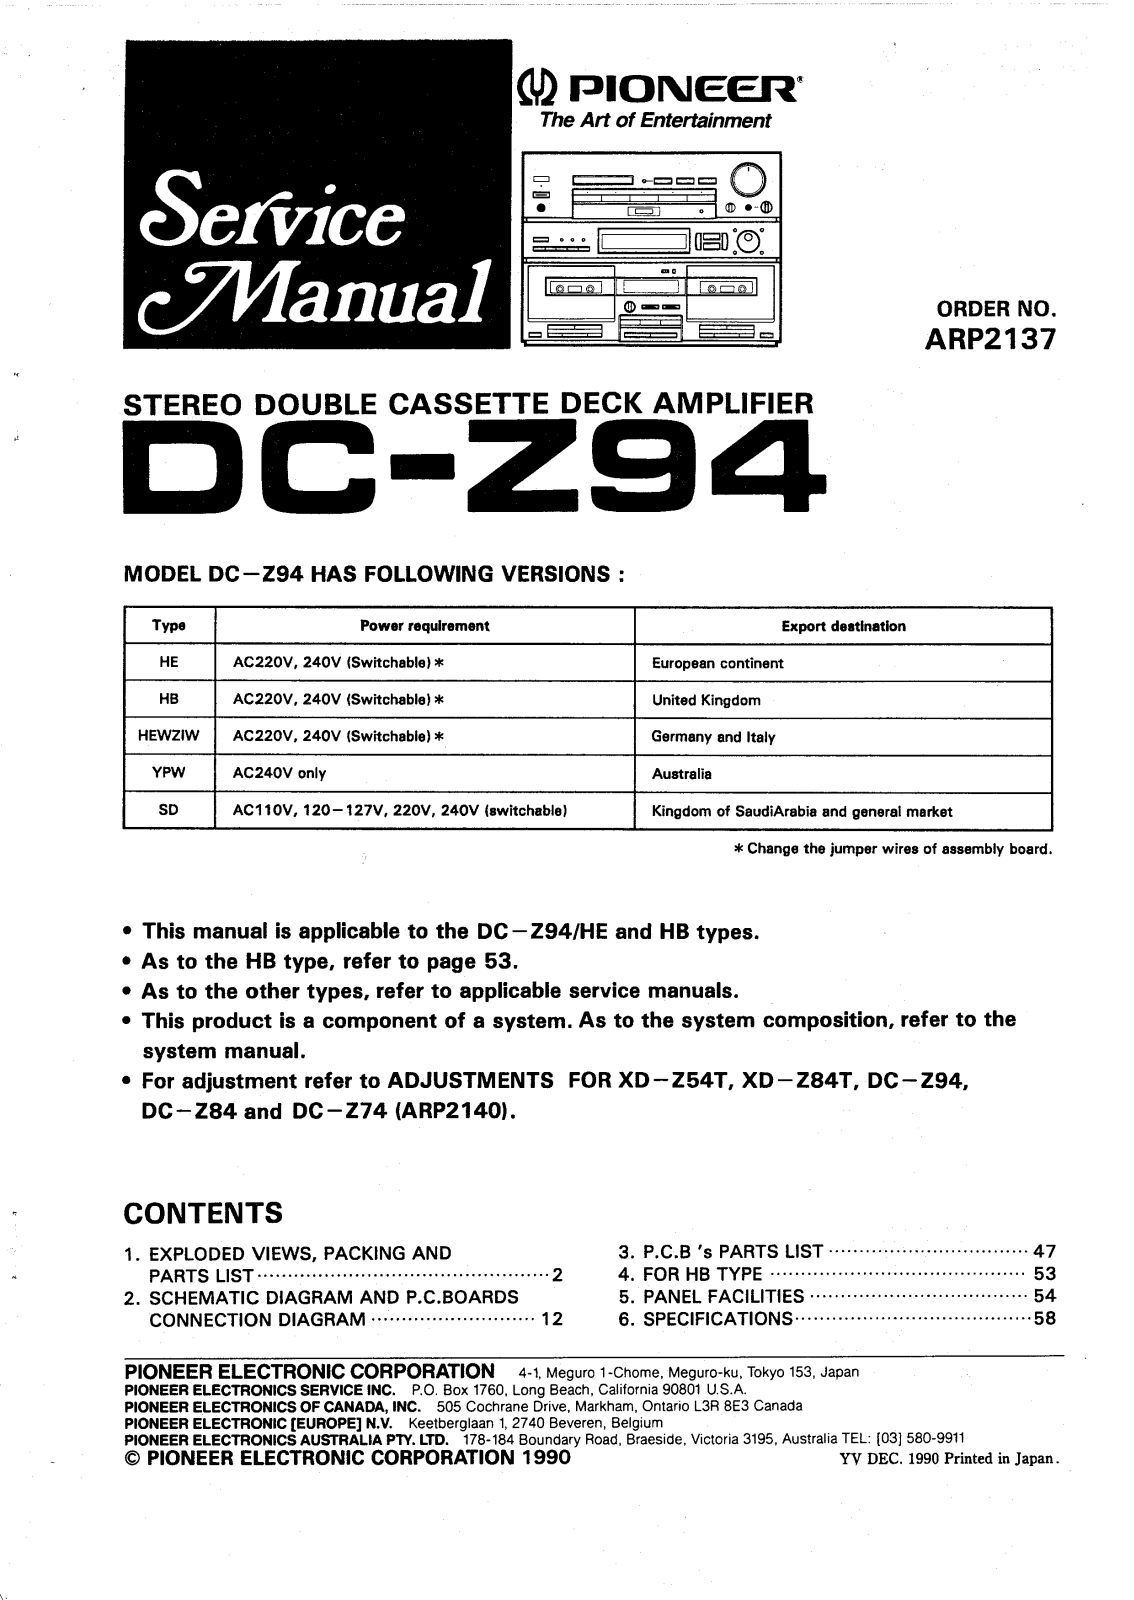 Pioneer DCZ-94 Service manual